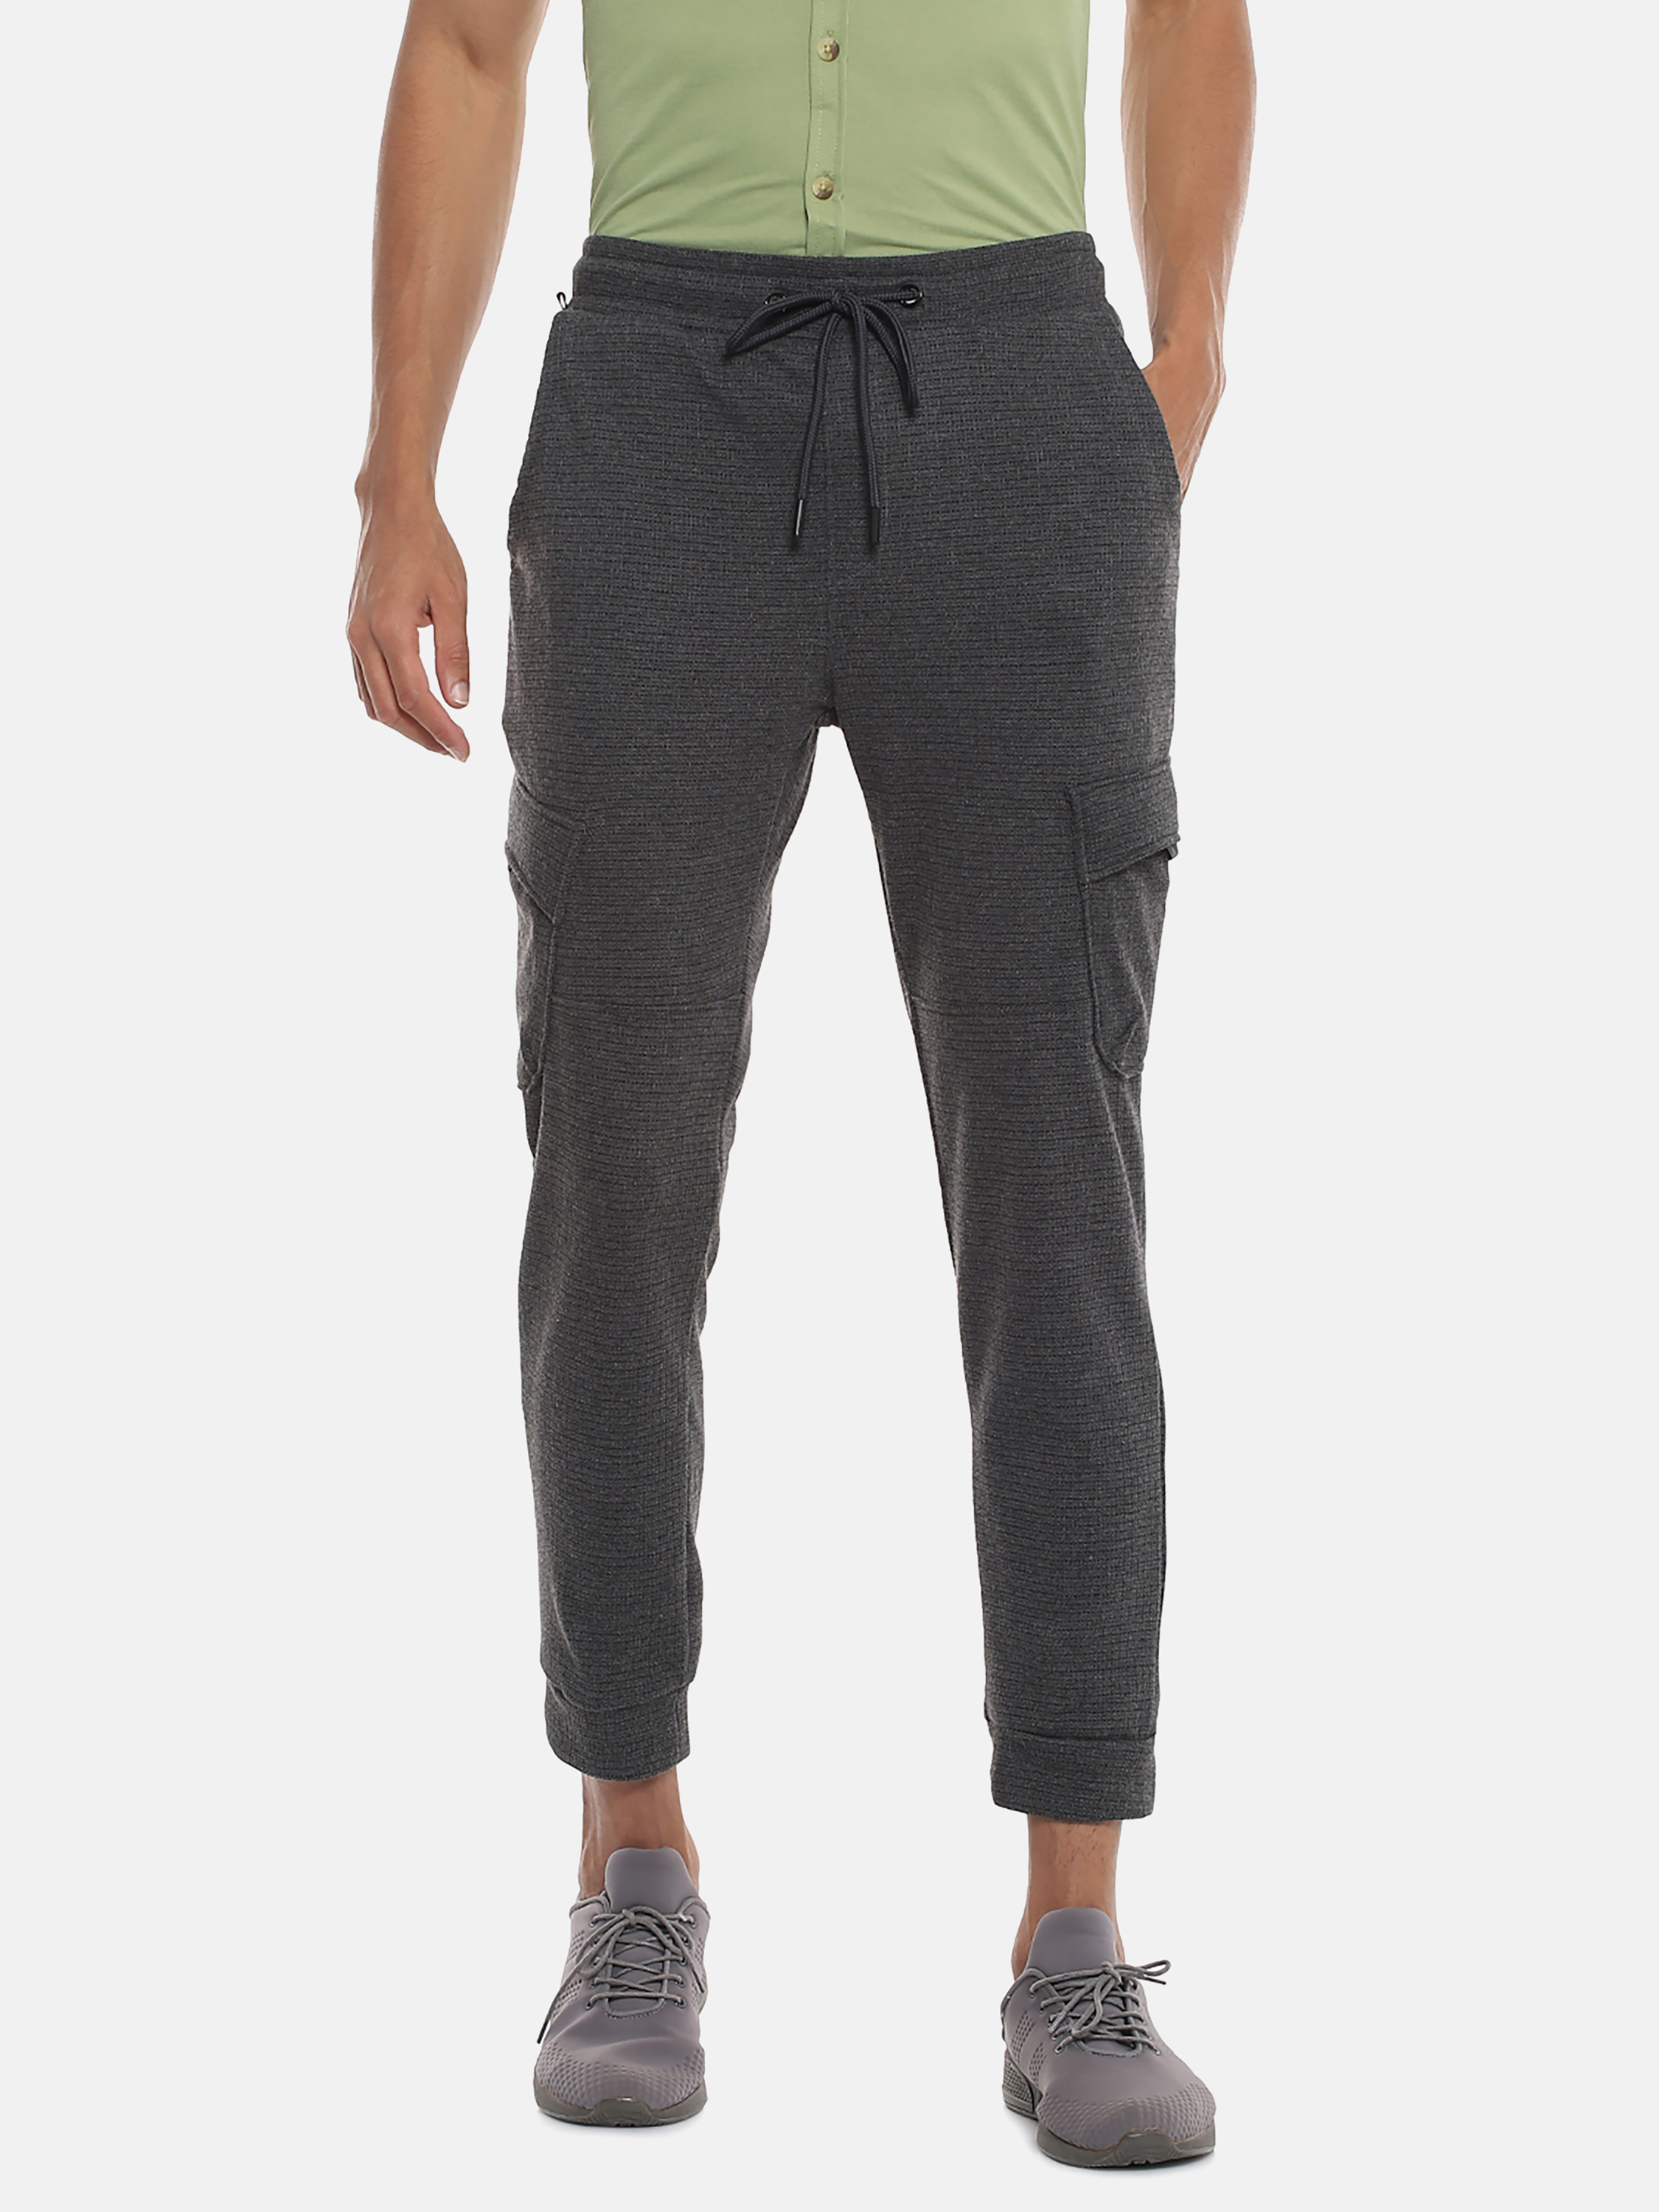 Campus Sutra Men Solid Stylish Trackpant.